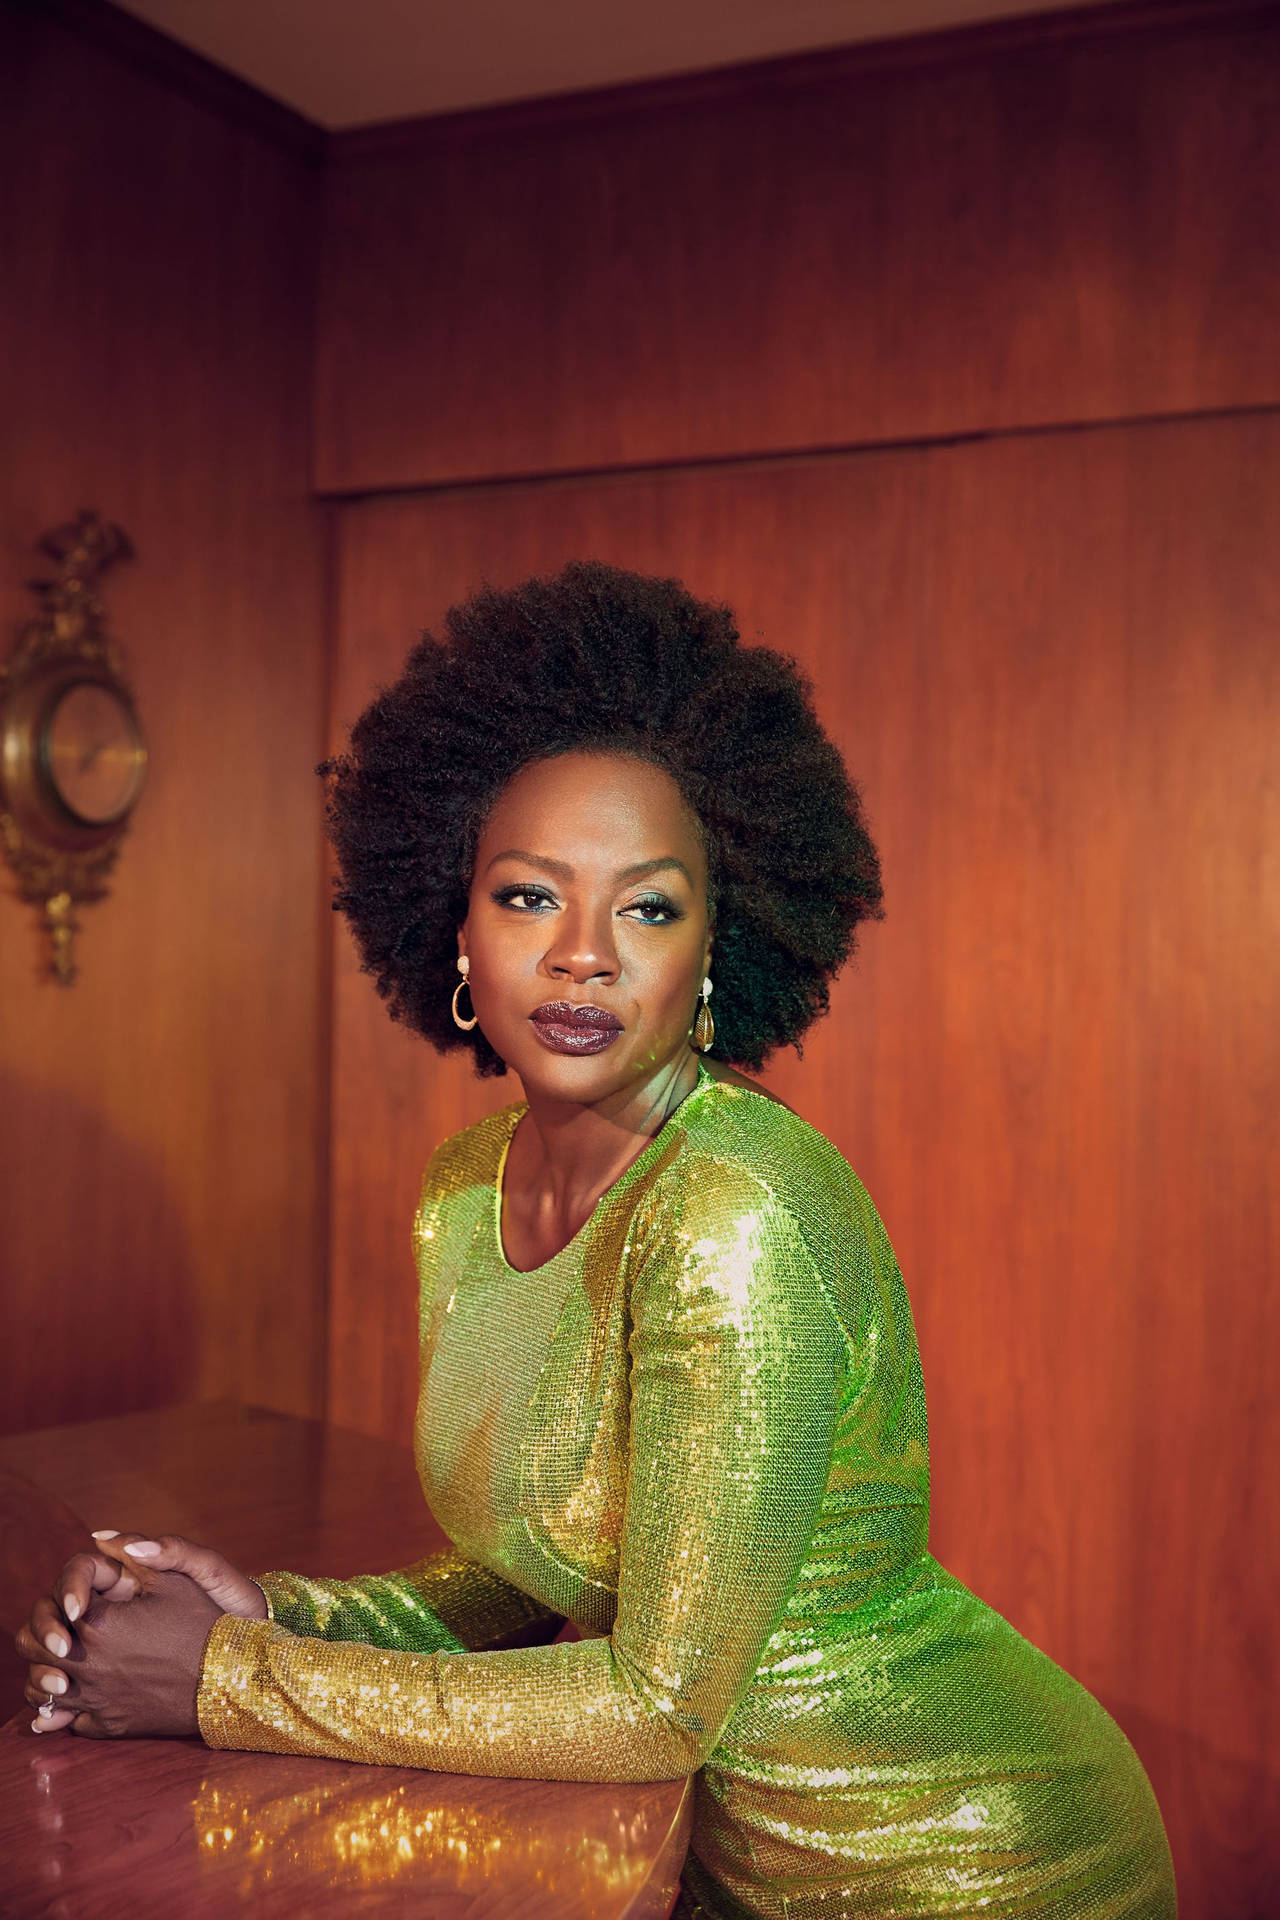 Violadavis Vackra L'officiel Usa-fotografering. (this Would Be A Title Or Caption For A Wallpaper Featuring Viola Davis From Her Photoshoot With L'officiel Usa Magazine.) Wallpaper